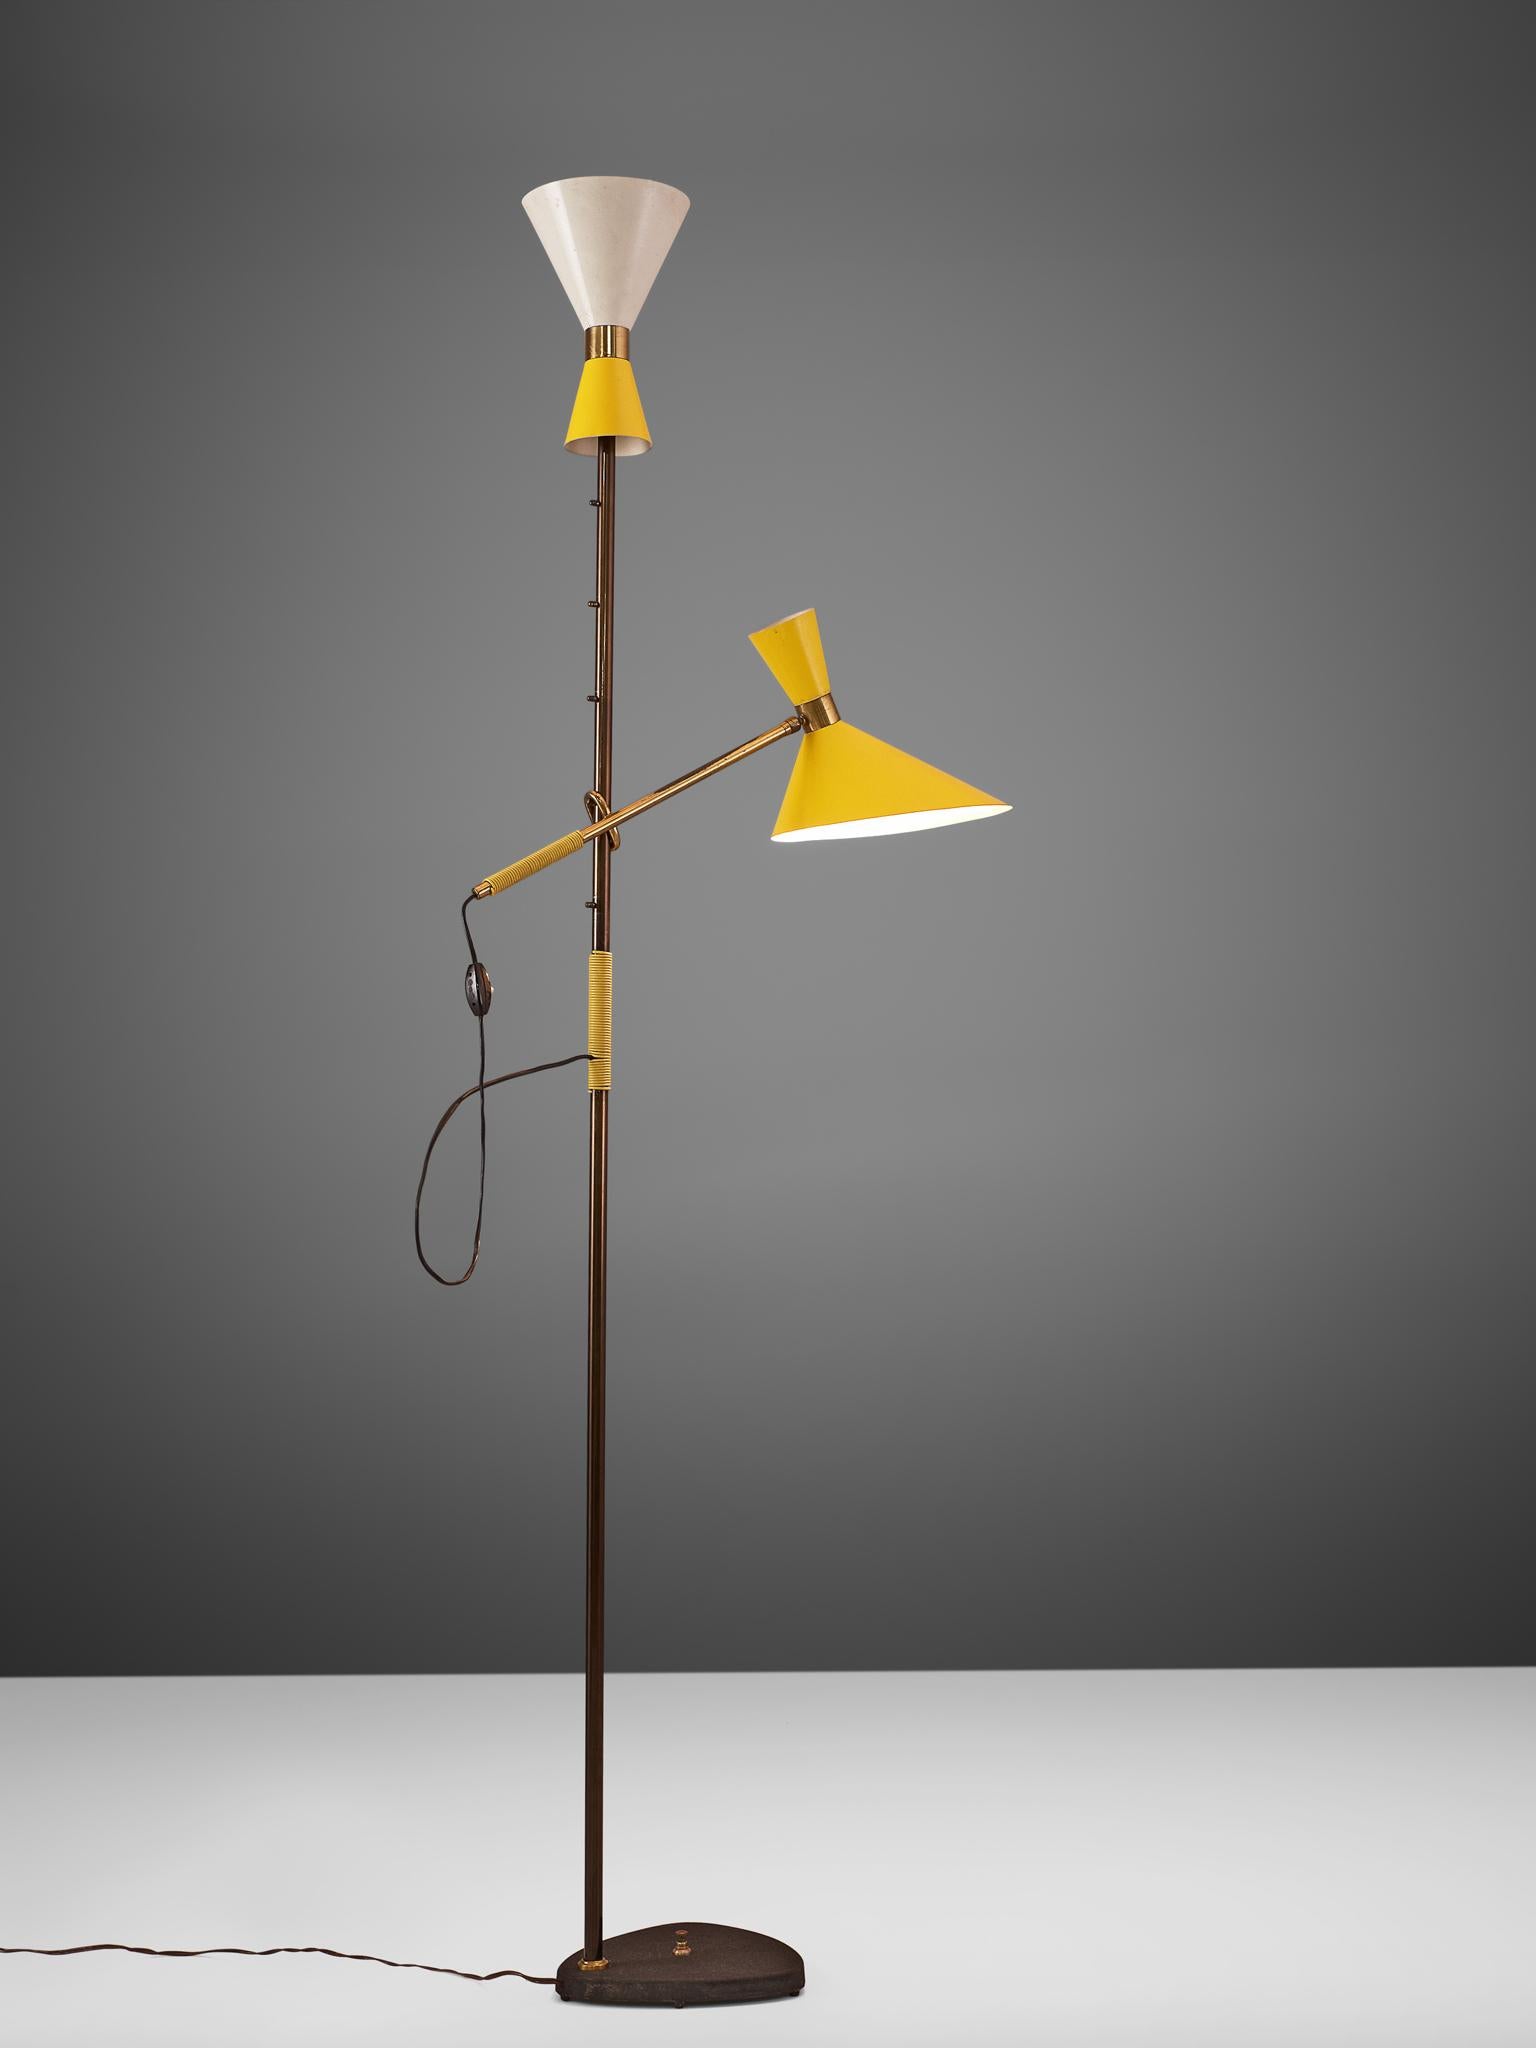 J.T. Kalmar, floor lamp 'Pelikan,' metal, fabric, green marble, brass, Austria, 1950s.

Slender floor lamp with chracteristic and inventive adjustable height mechanism. The base holds one shade, that is faced towards the ceiling. The other shade is